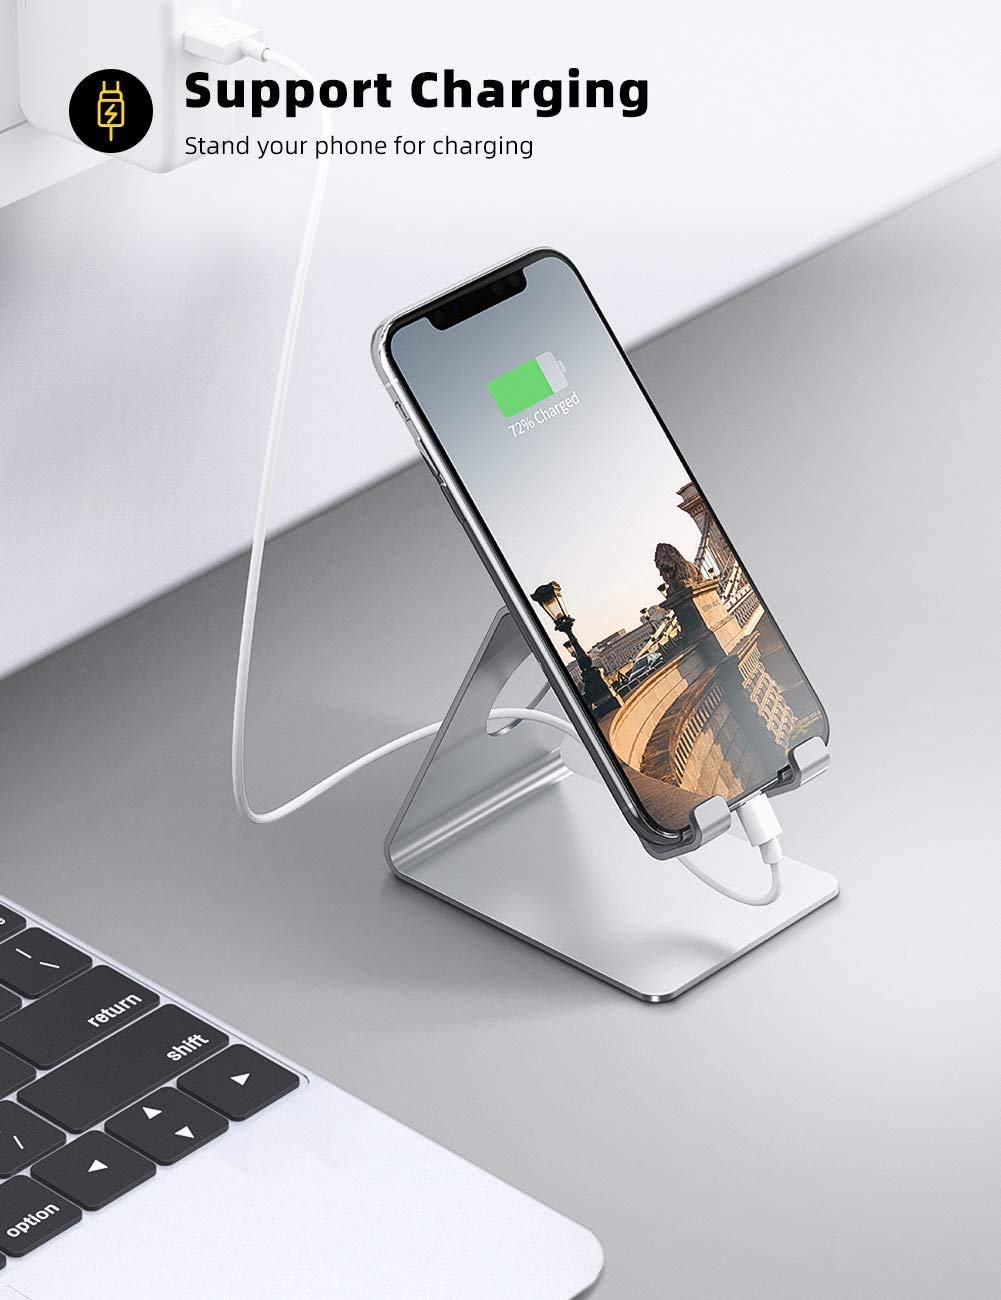 Lamicall Cell Phones Stand Desktop, Lamicall Mobile Phone Holder Dock Cradle Compatible with Switch, All Android Smartphone, iPhone 12 11 X XR XS XS Max 8 7 7p 6 6p 6s. etc, Phone Accessories - Silver